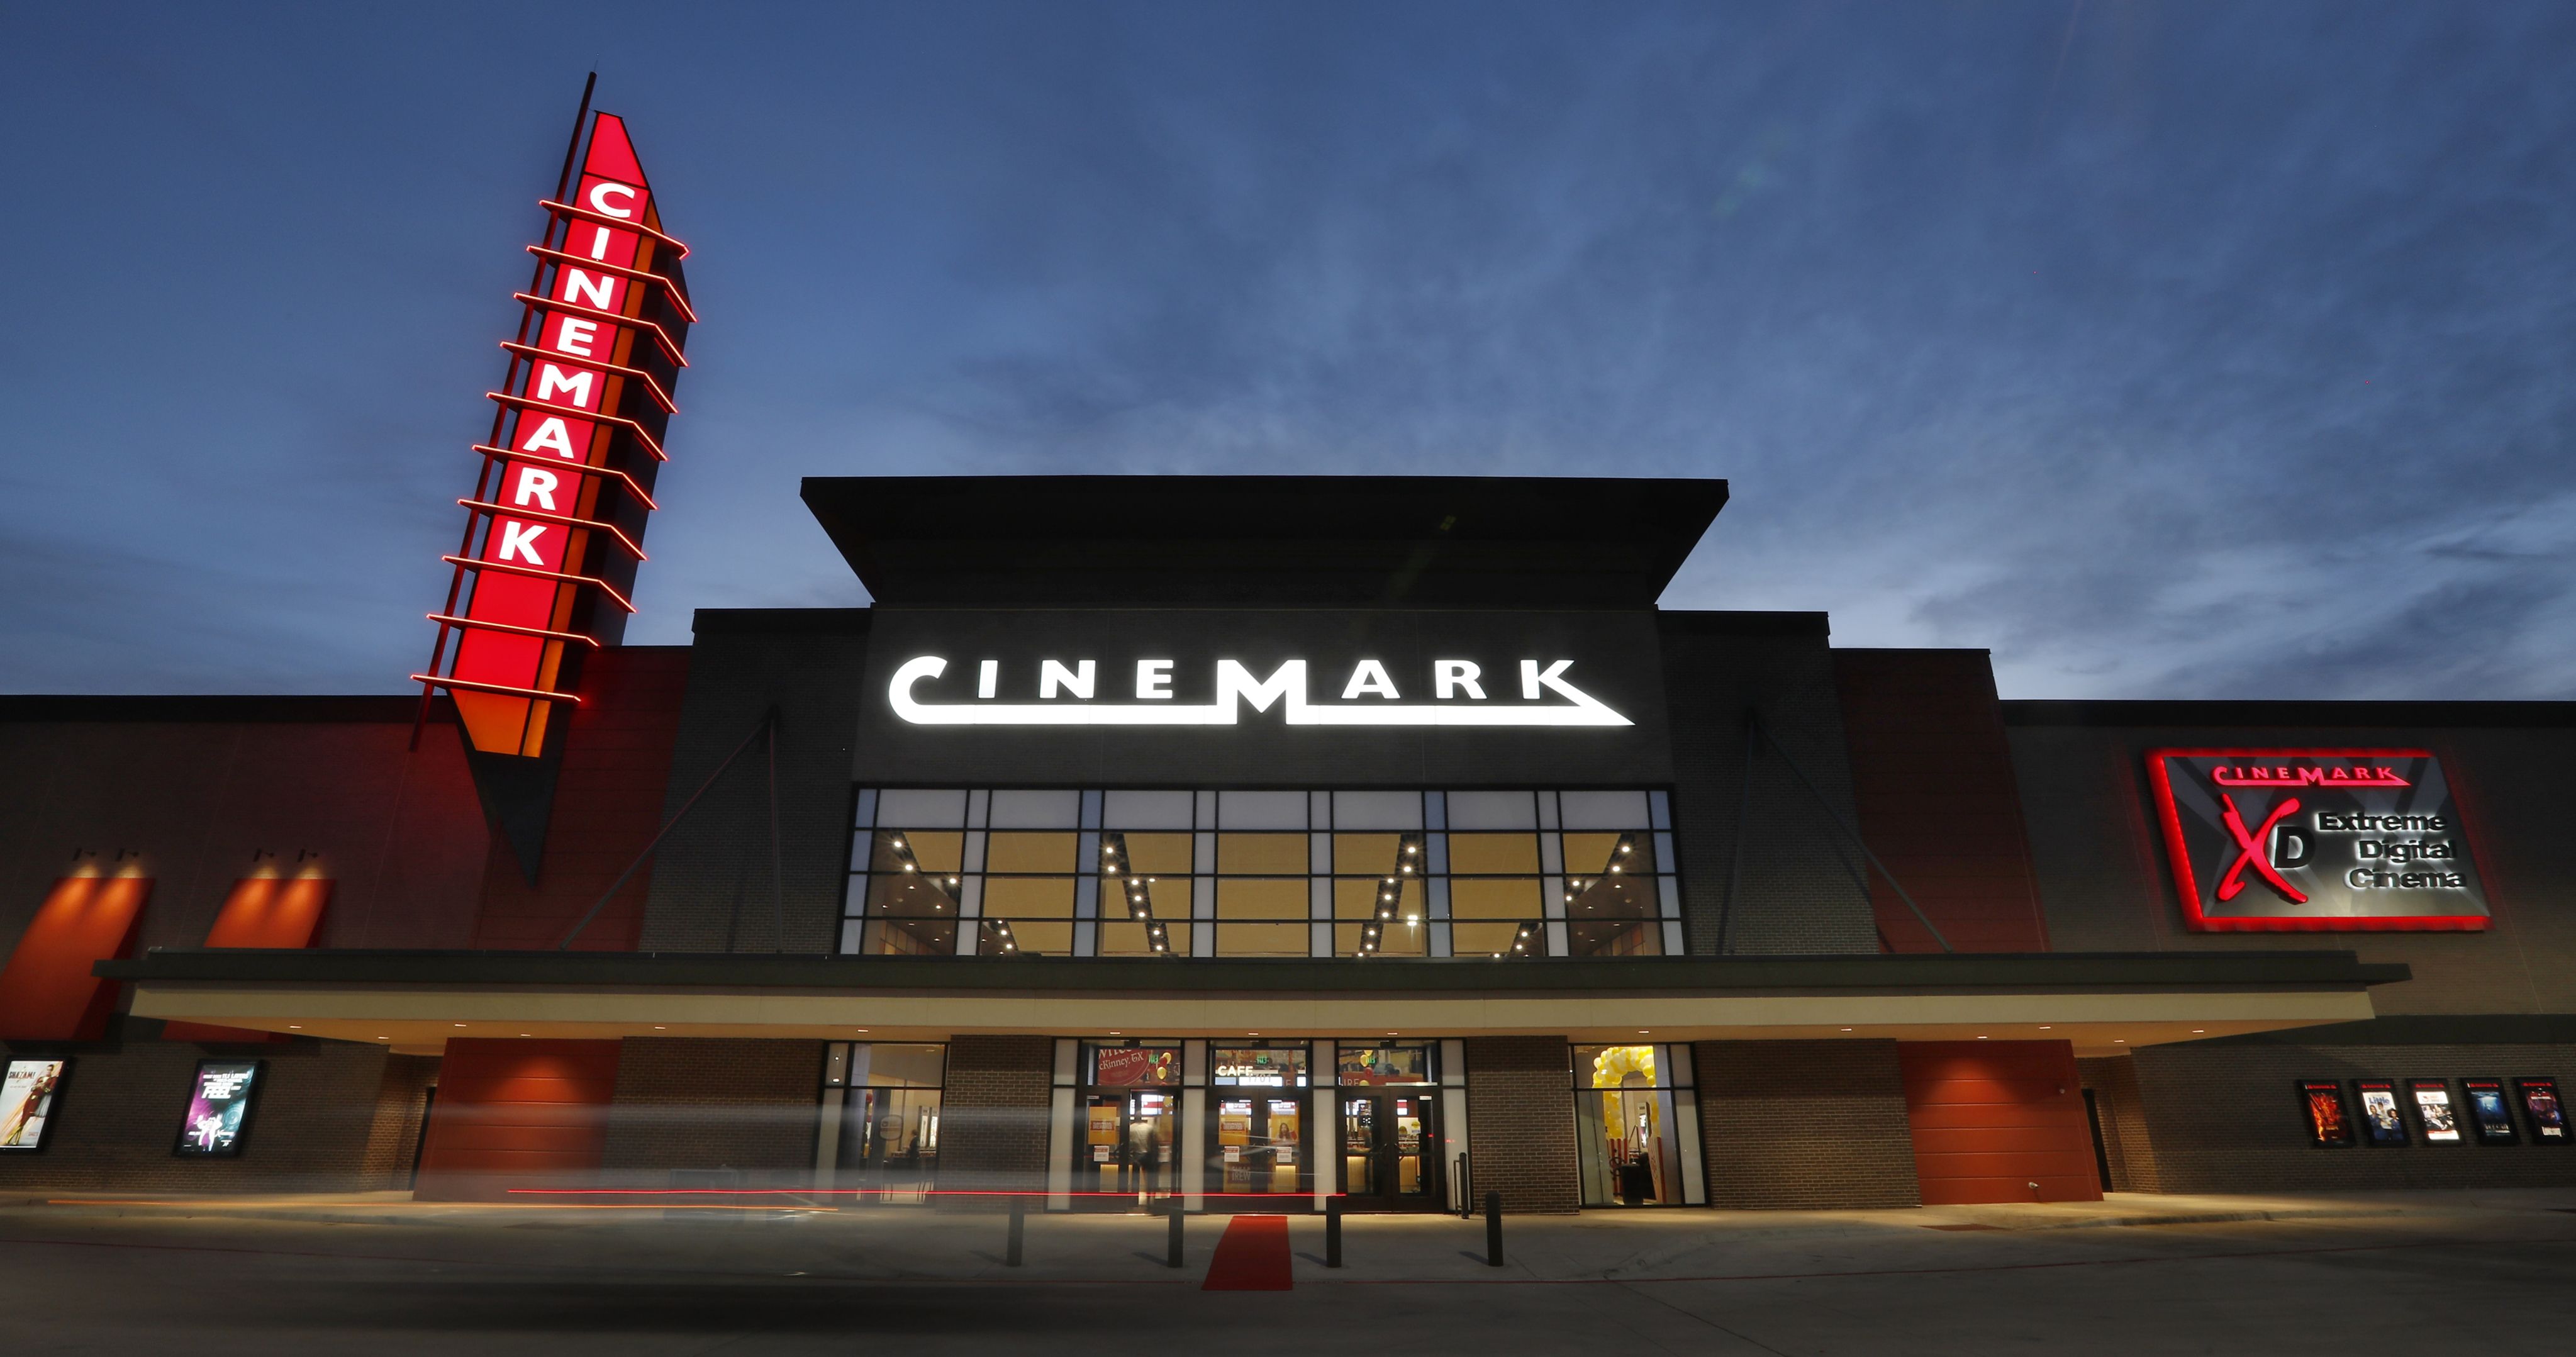 Cinemark Joins AMC Theatres in Delaying Reopening Date